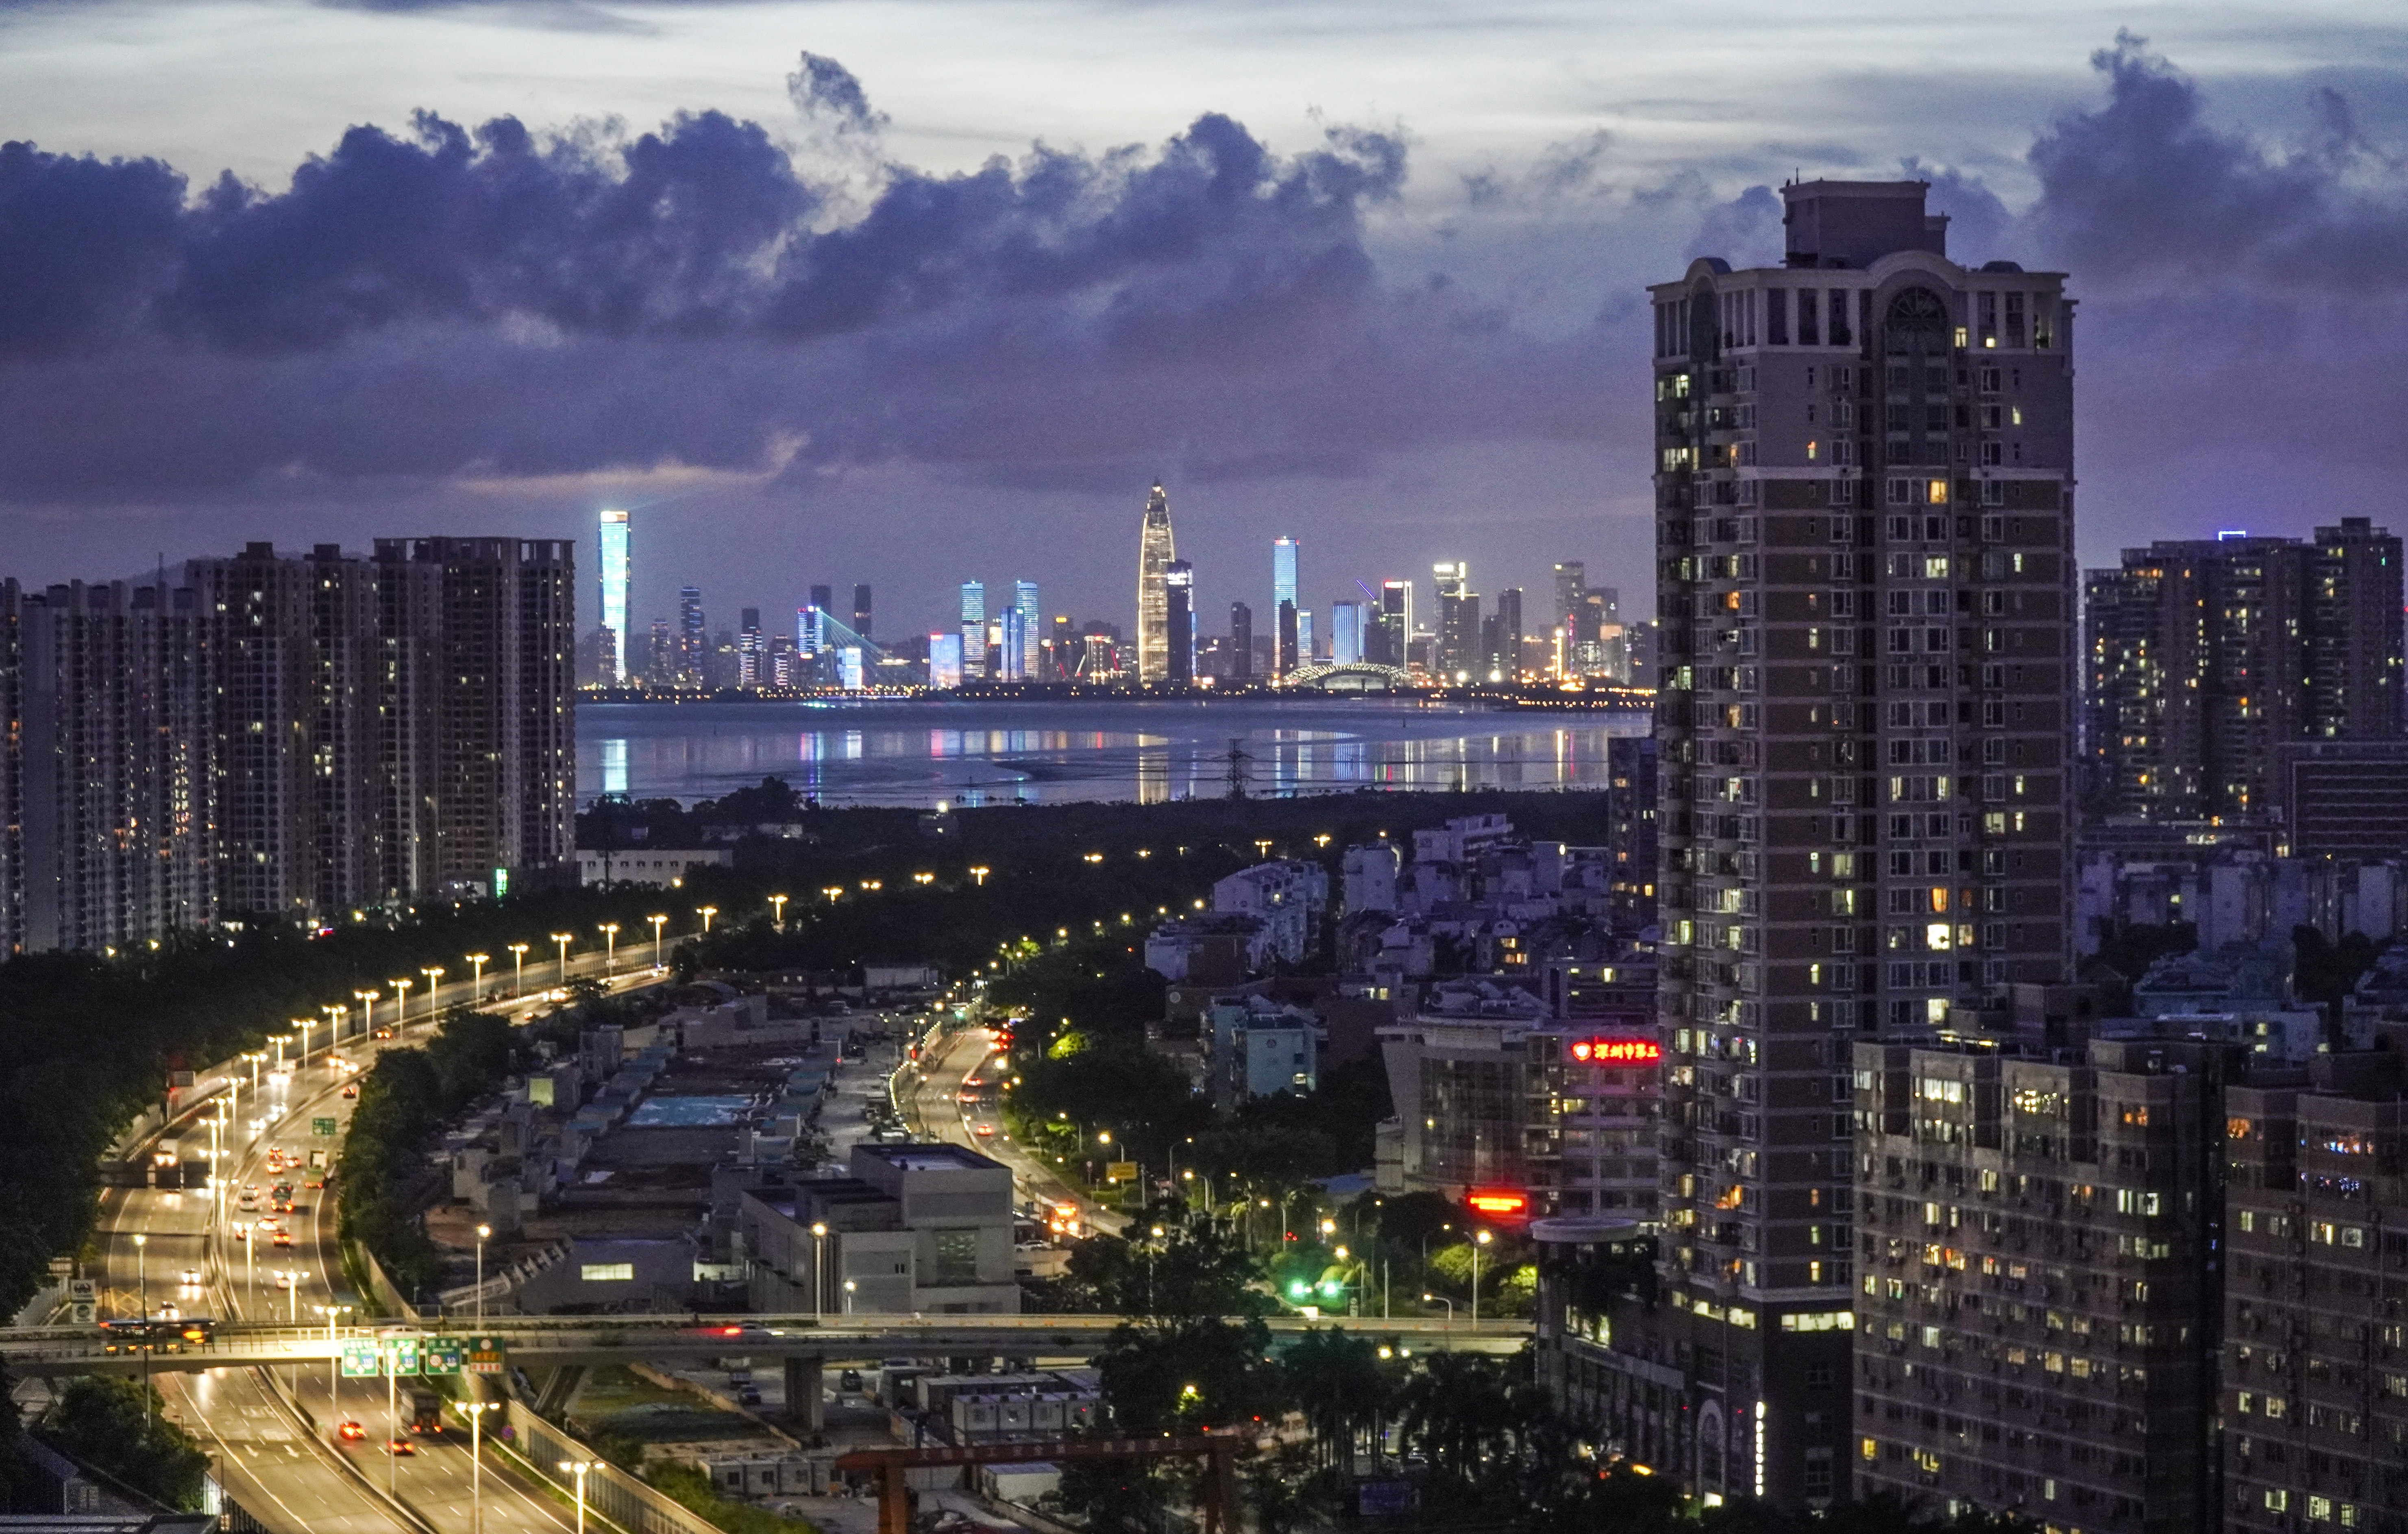 Hong Kong, Macau, Shenzhen (pictured) and Guangzhou would be the four key cities of the Greater Bay Area plan. Photo: Roy Issa